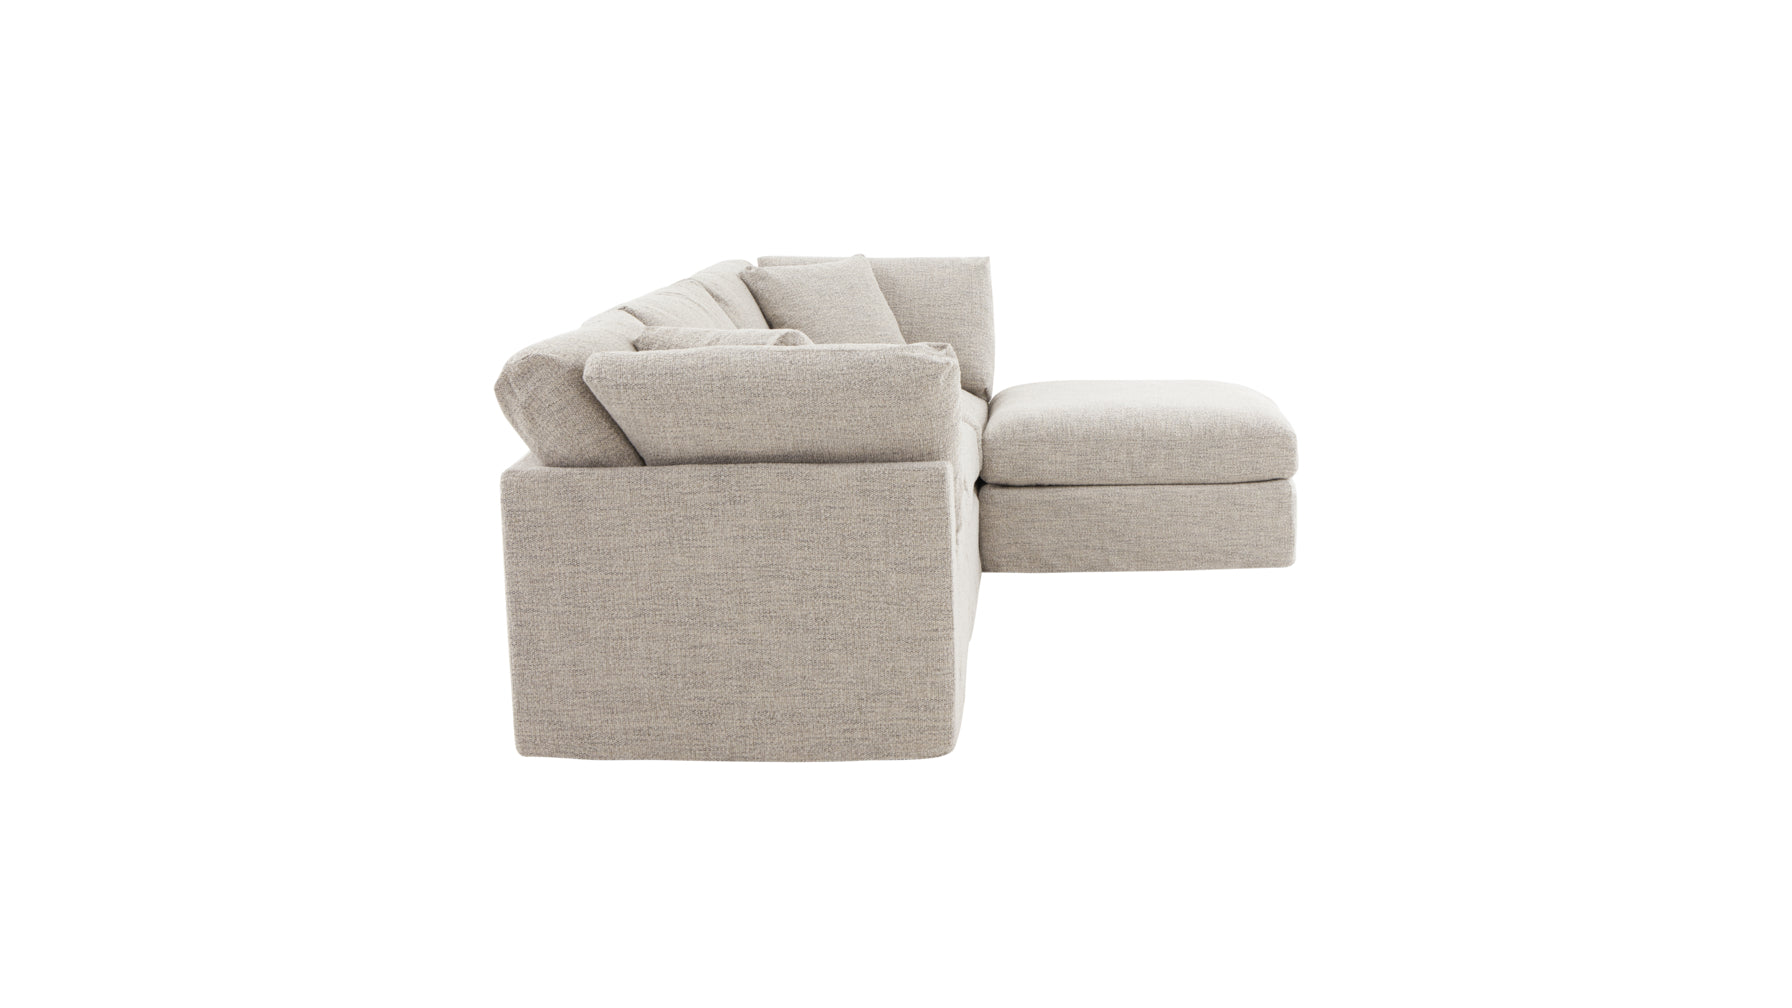 Get Together™ 4-Piece Modular Sectional, Standard, Oatmeal - Image 6